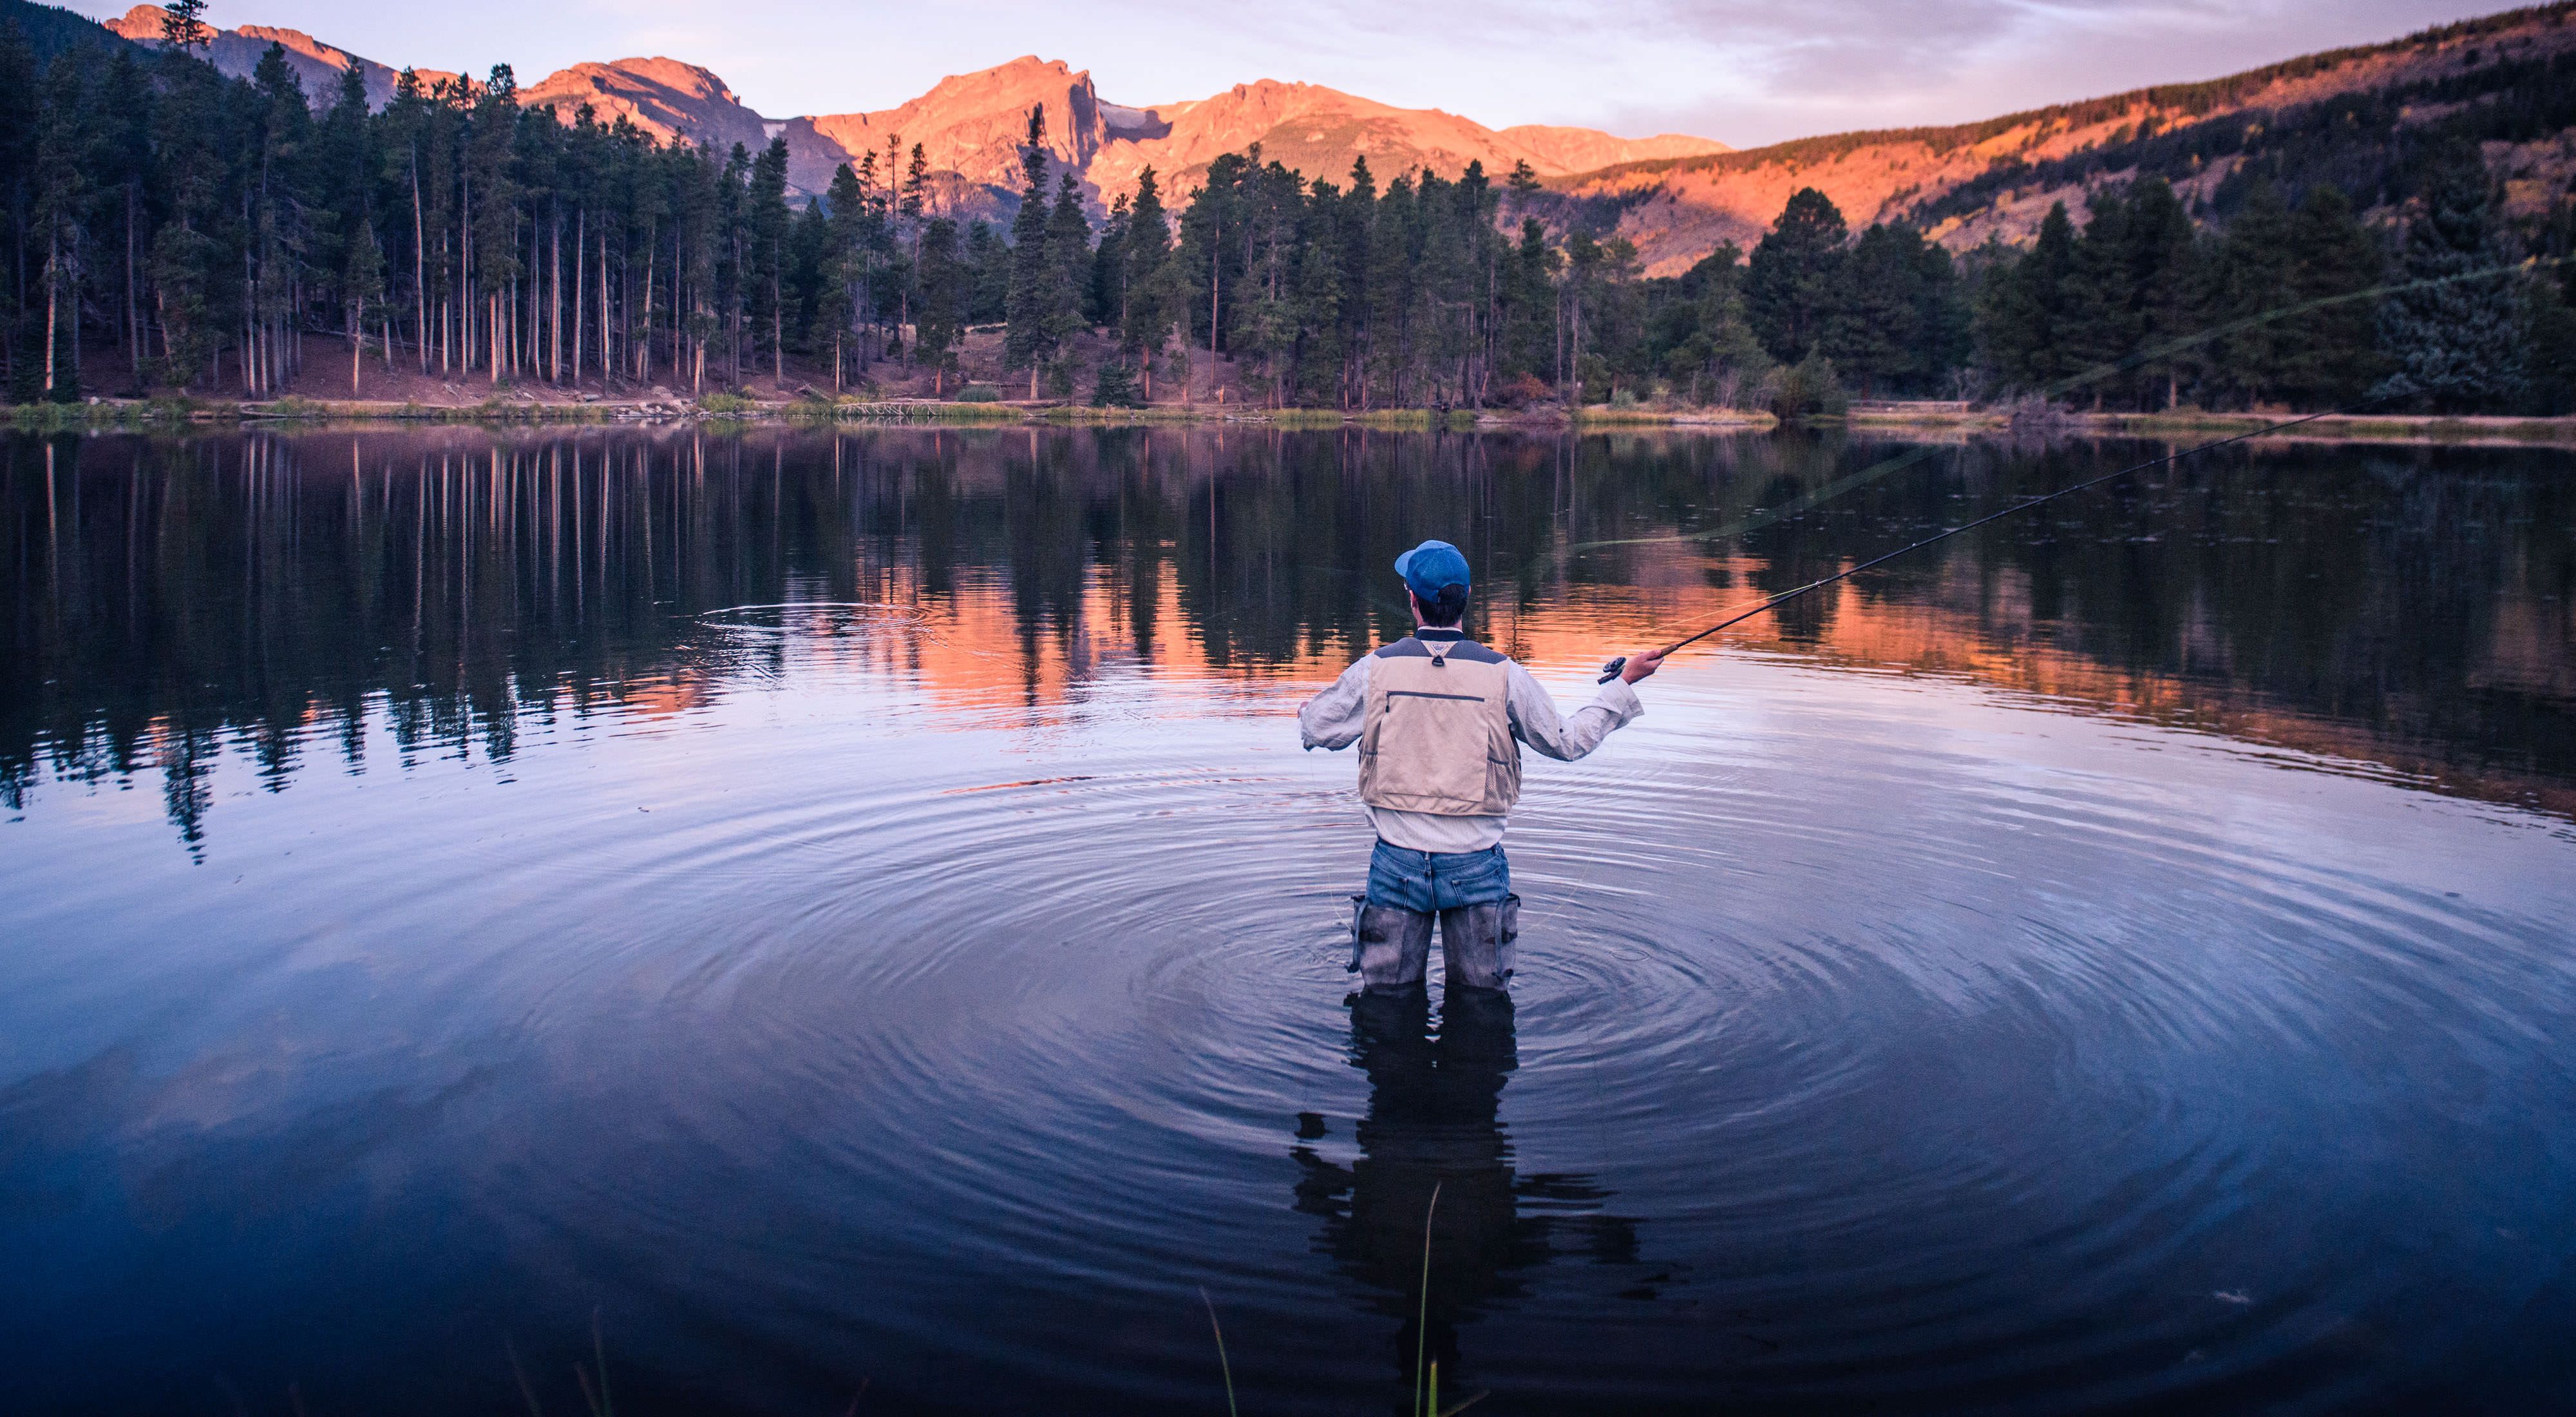 At more than 8,600 feet above sea level, Rocky Mountain National Park’s Sprague Lake is a popular spot for fly-fishing and hiking.